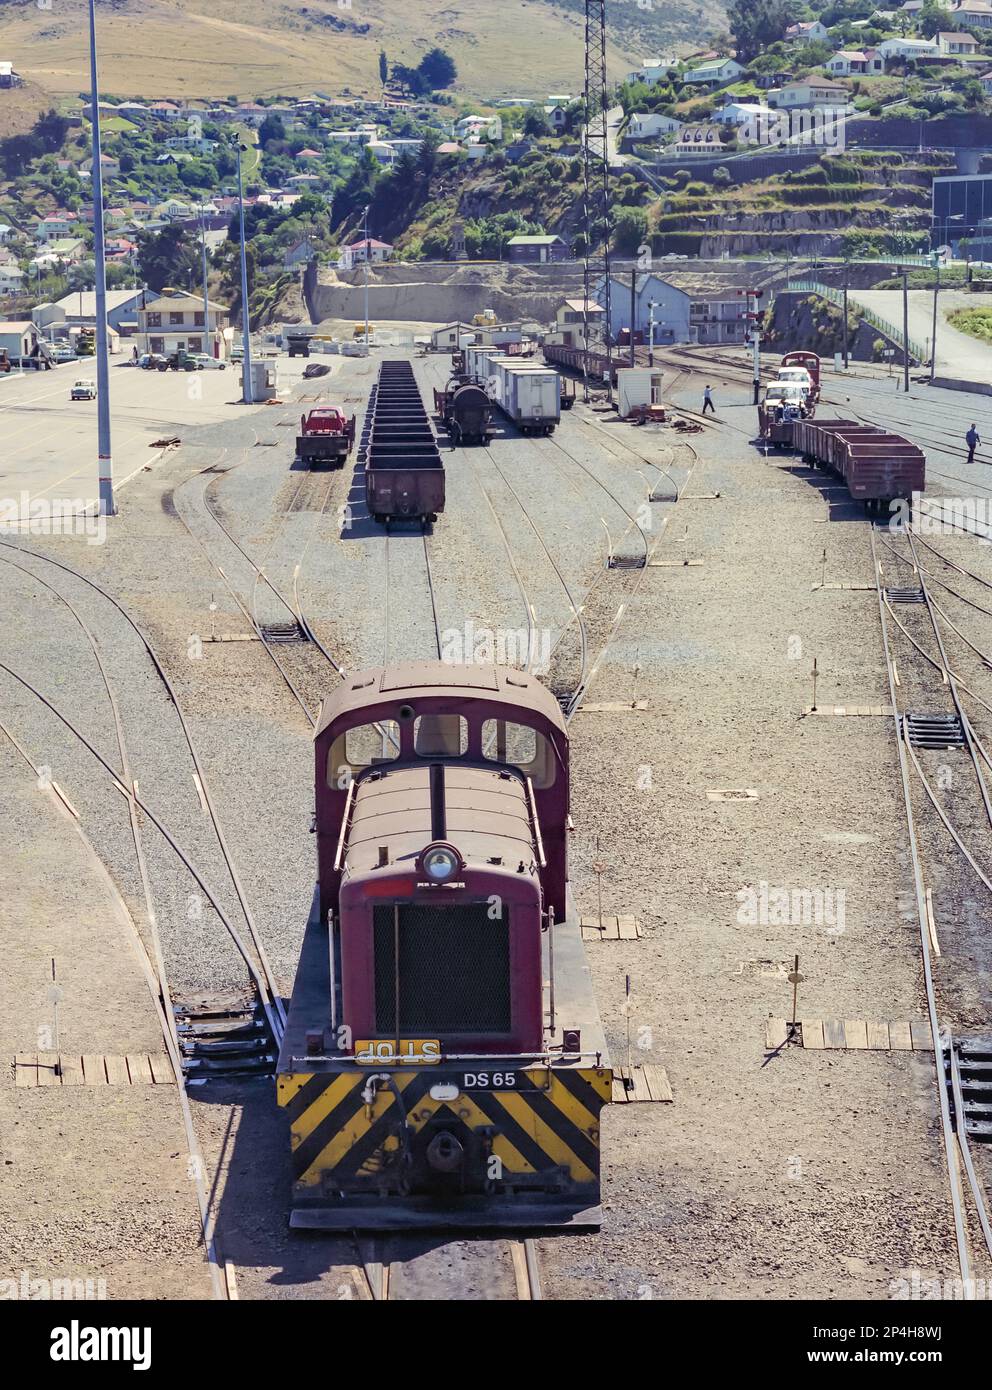 A 1981 historic image of goods trains, rail lines, and the green hills behind the goods yard in Lyttelton Harbour near the city of Christchurch on the south island of New Zealand. In the foreground is a DS class shunting locomotive DS65 that came into service in 1955 and was scrapped almost exactly a year after this shot was taken in April 1982 Stock Photo